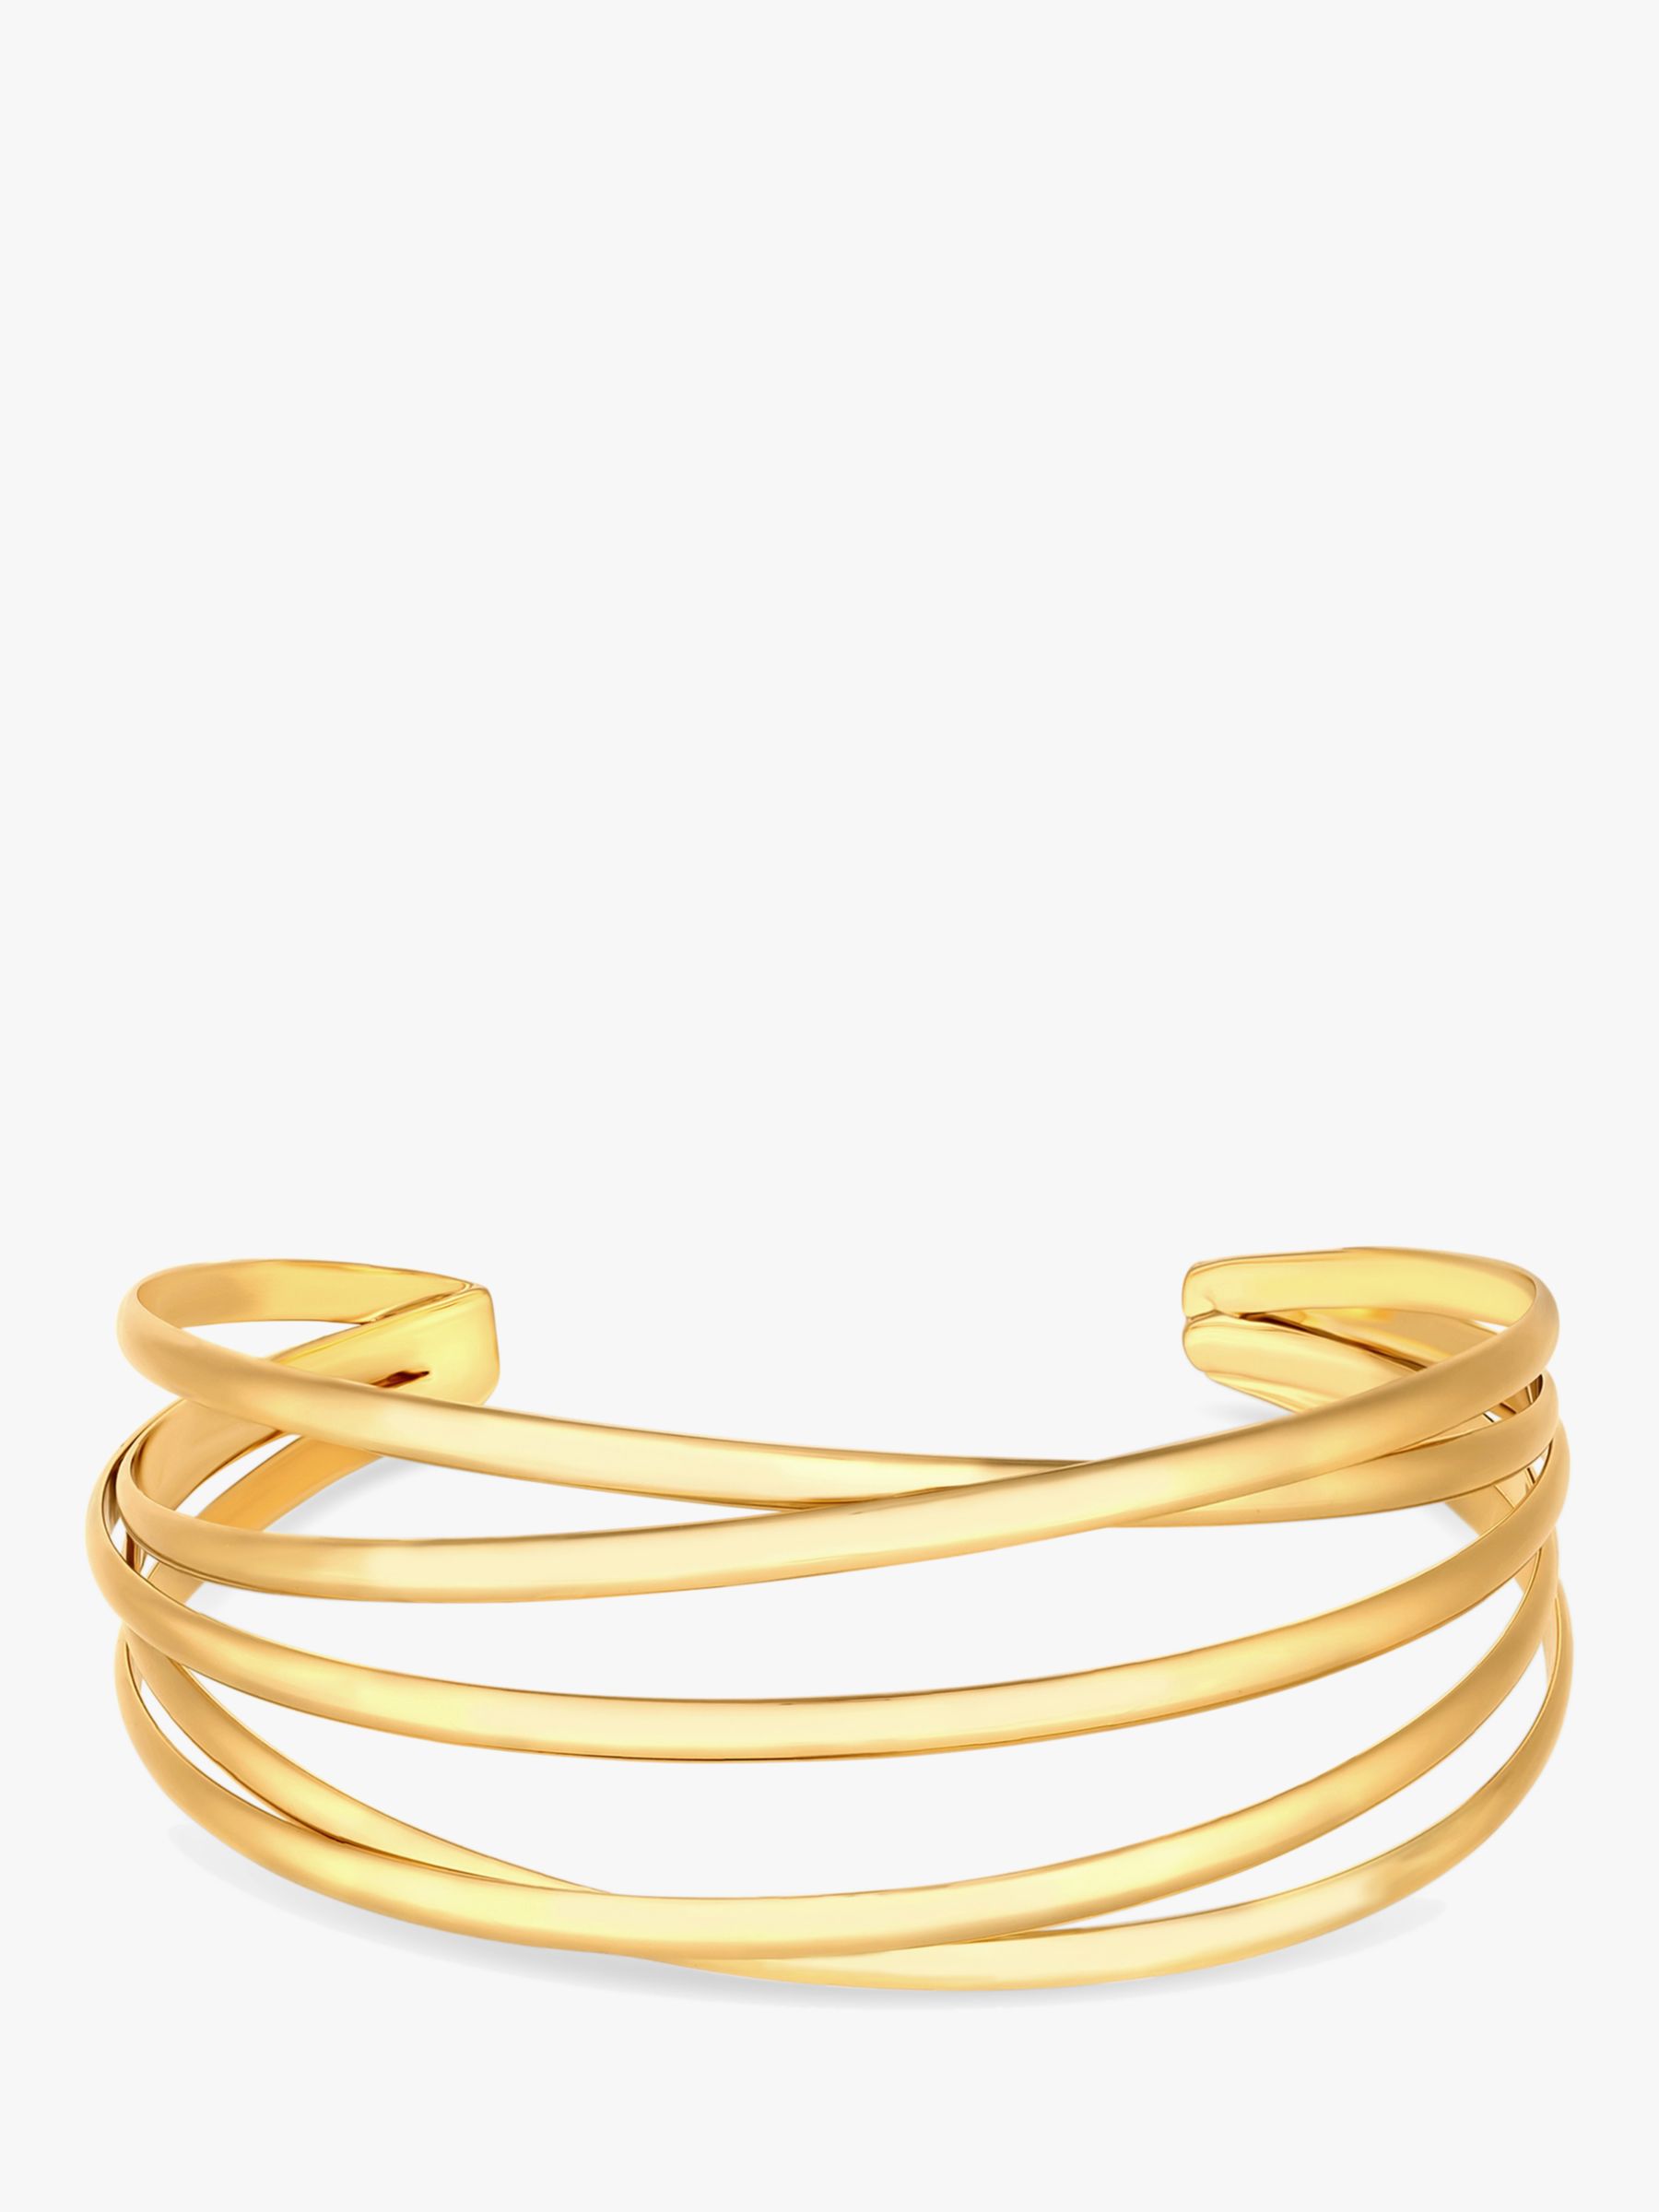 Buy Jon Richard Recycled Gold Plated Polished Weave Cuff Bangle, Gold Online at johnlewis.com